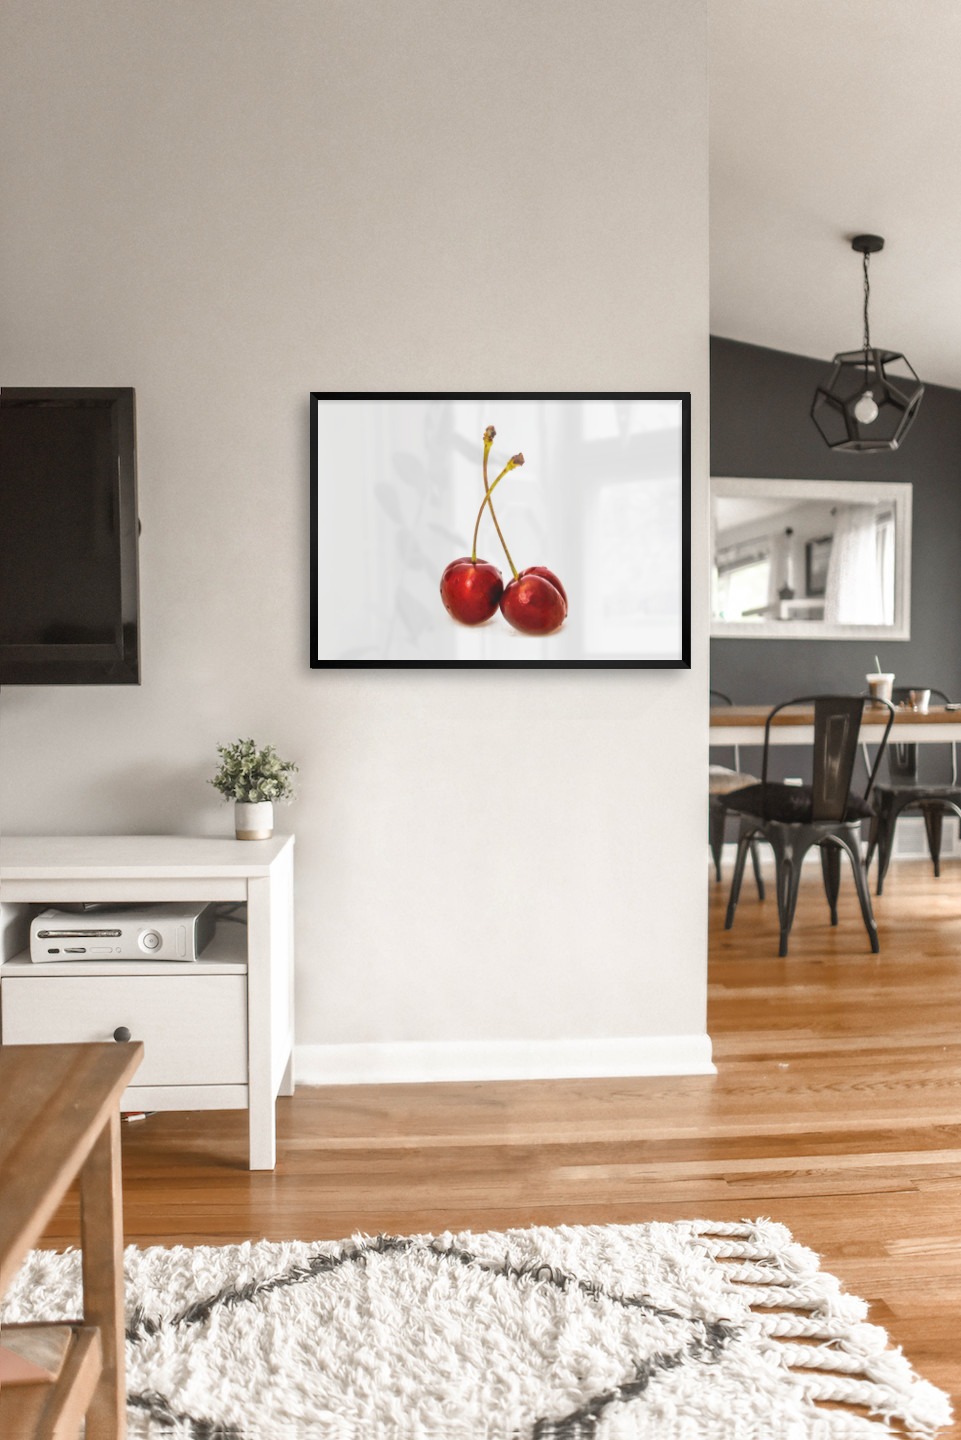 Gallery wall with picture frame in black in size 50x70 with print "Cherries with white background"